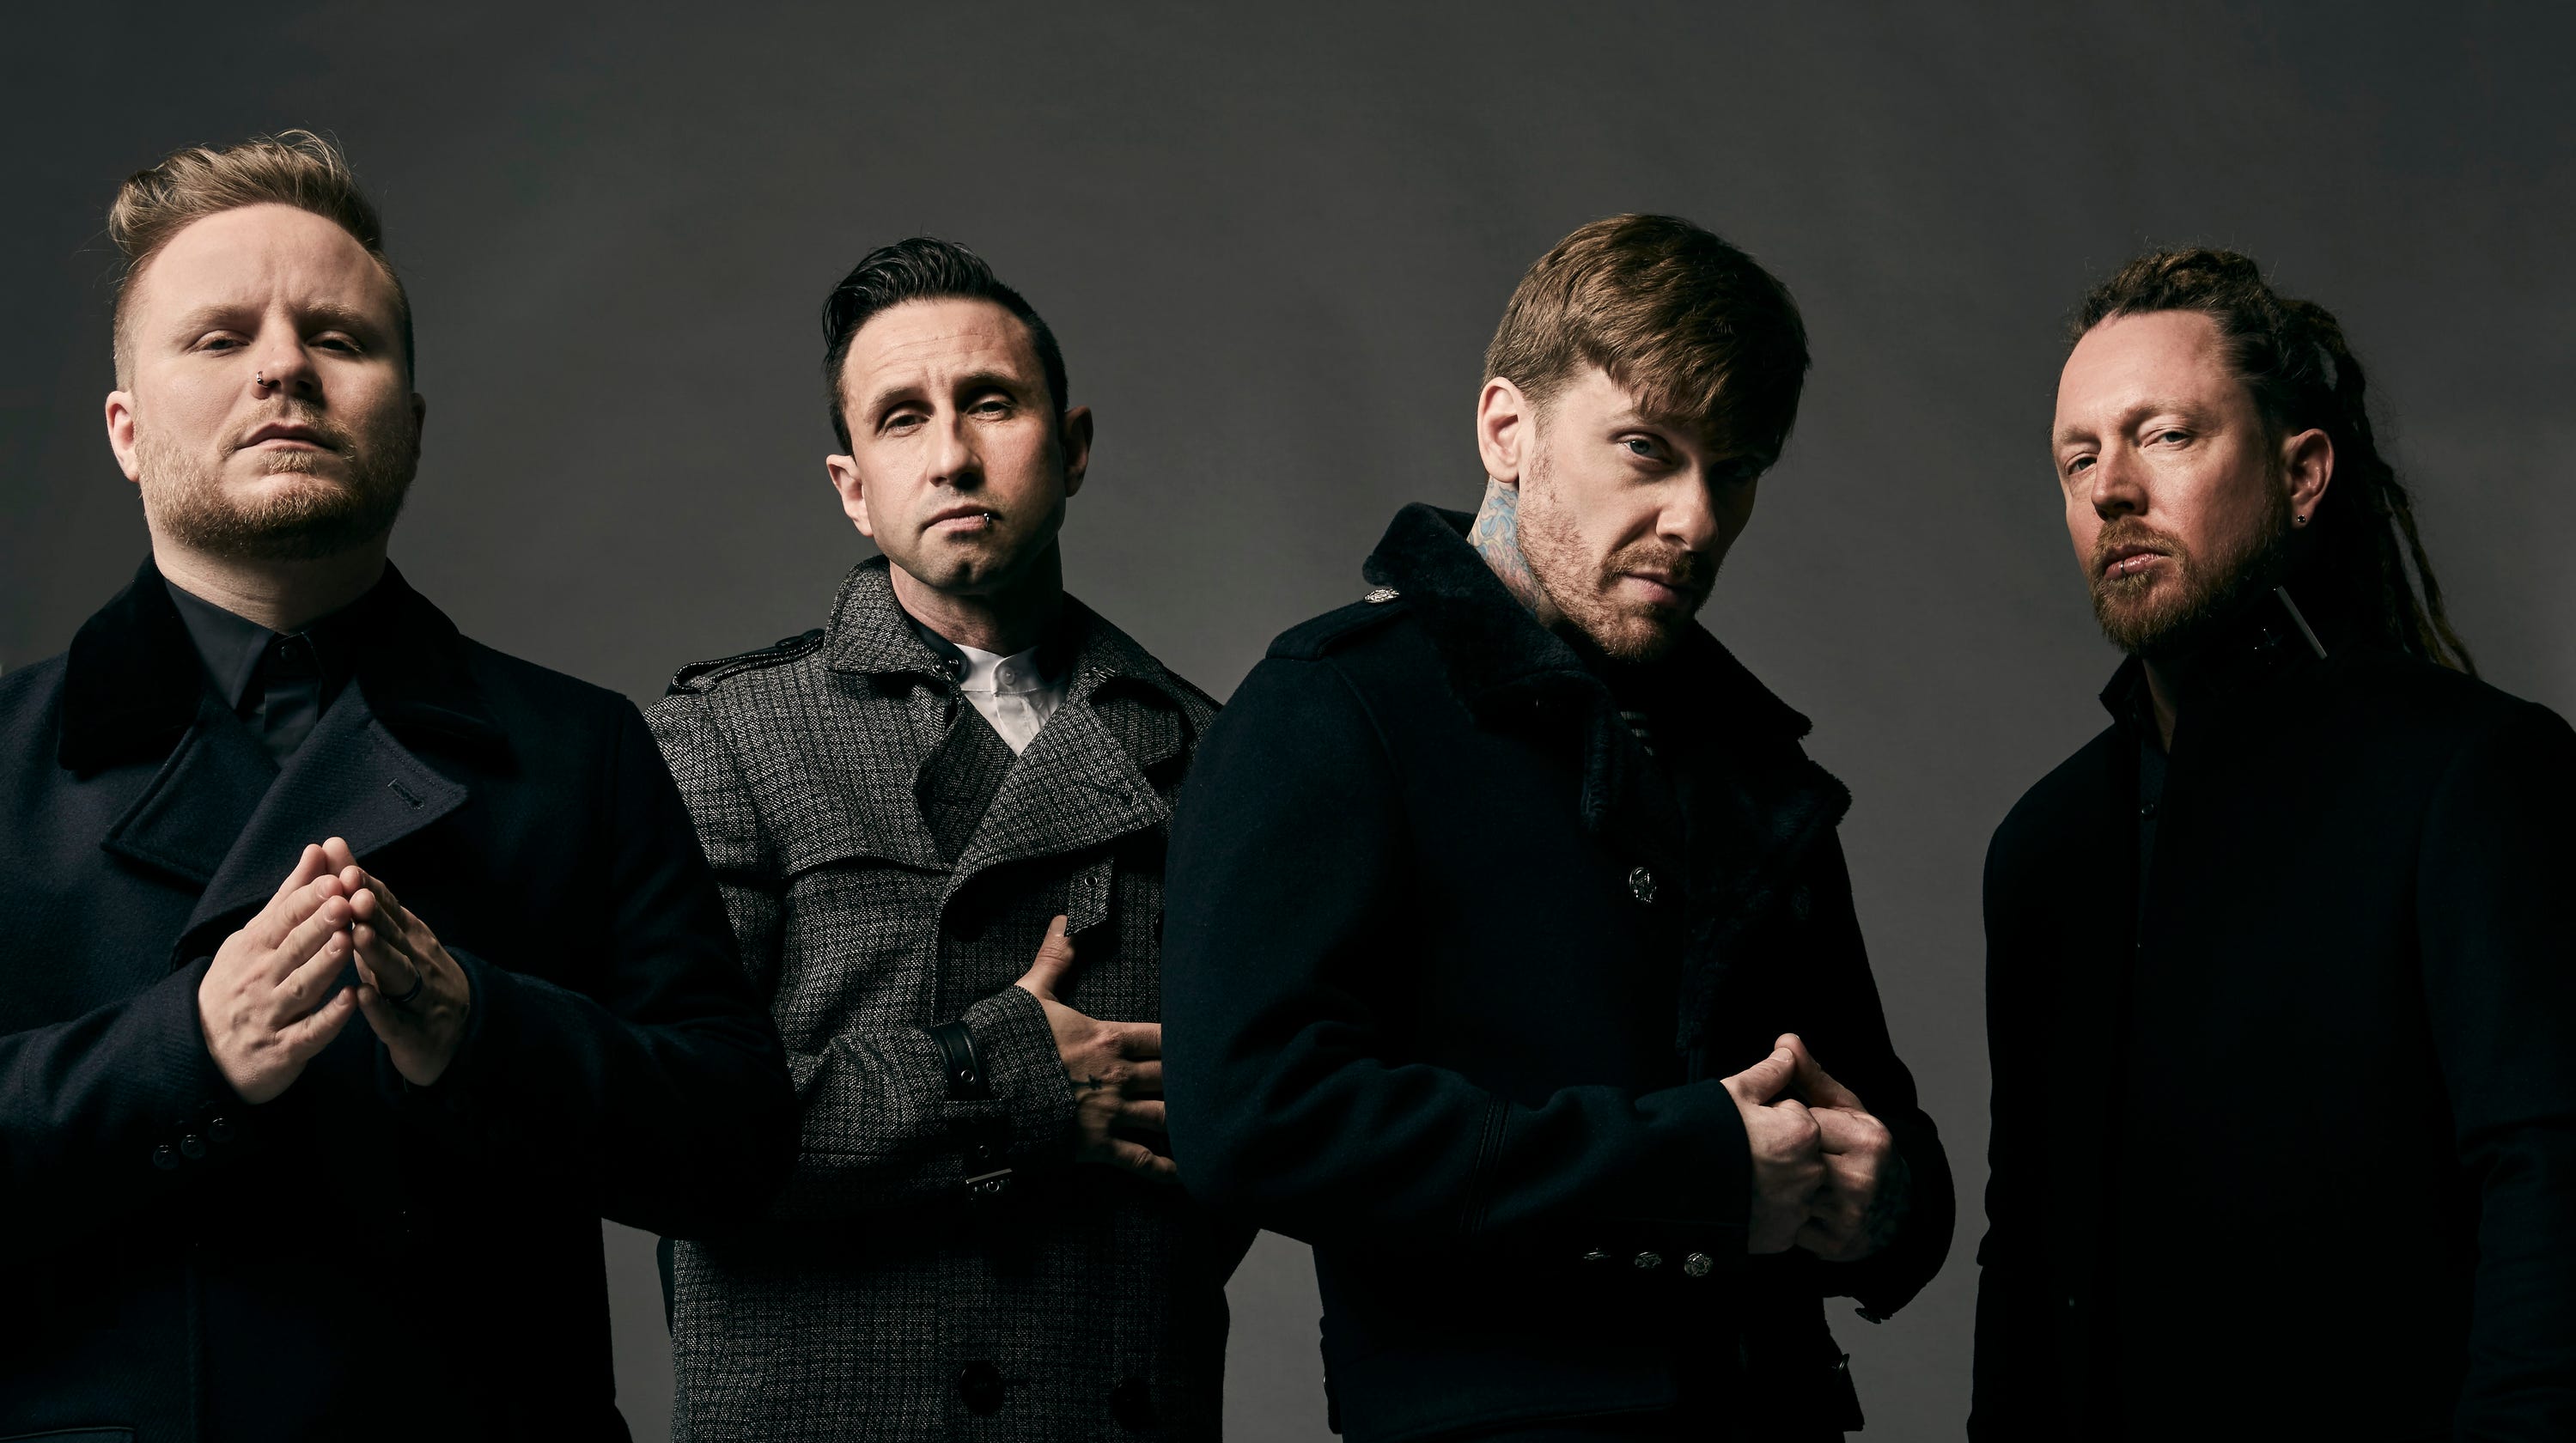 who did shinedown tour with in 2019